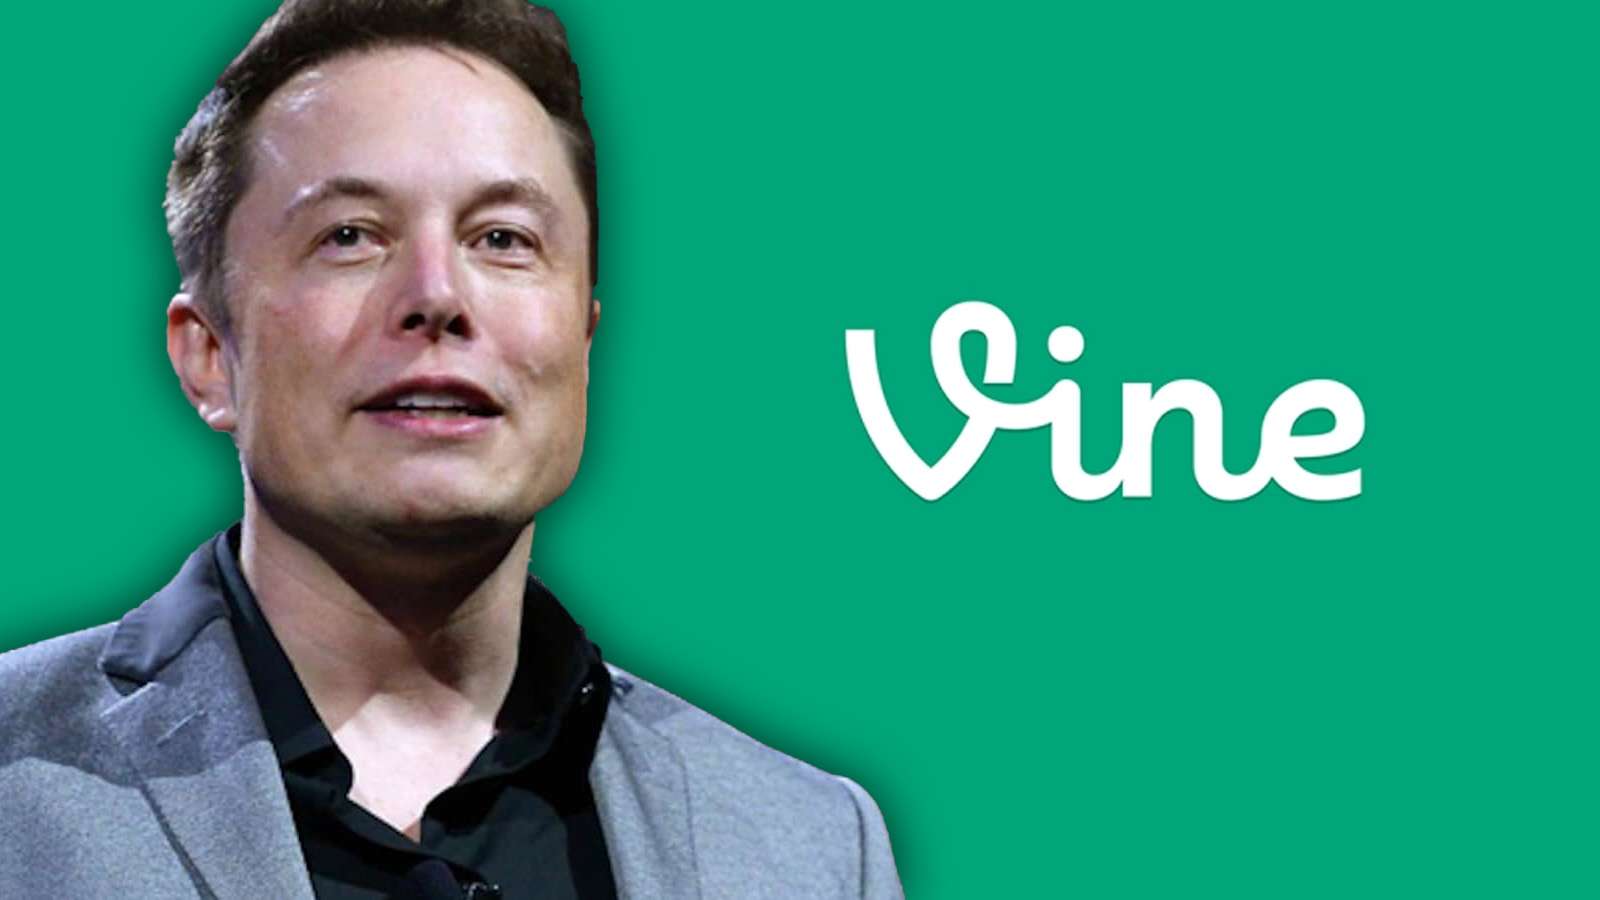 Is Vine coming back? Elon Musk sparks rumors after Twitter takeover